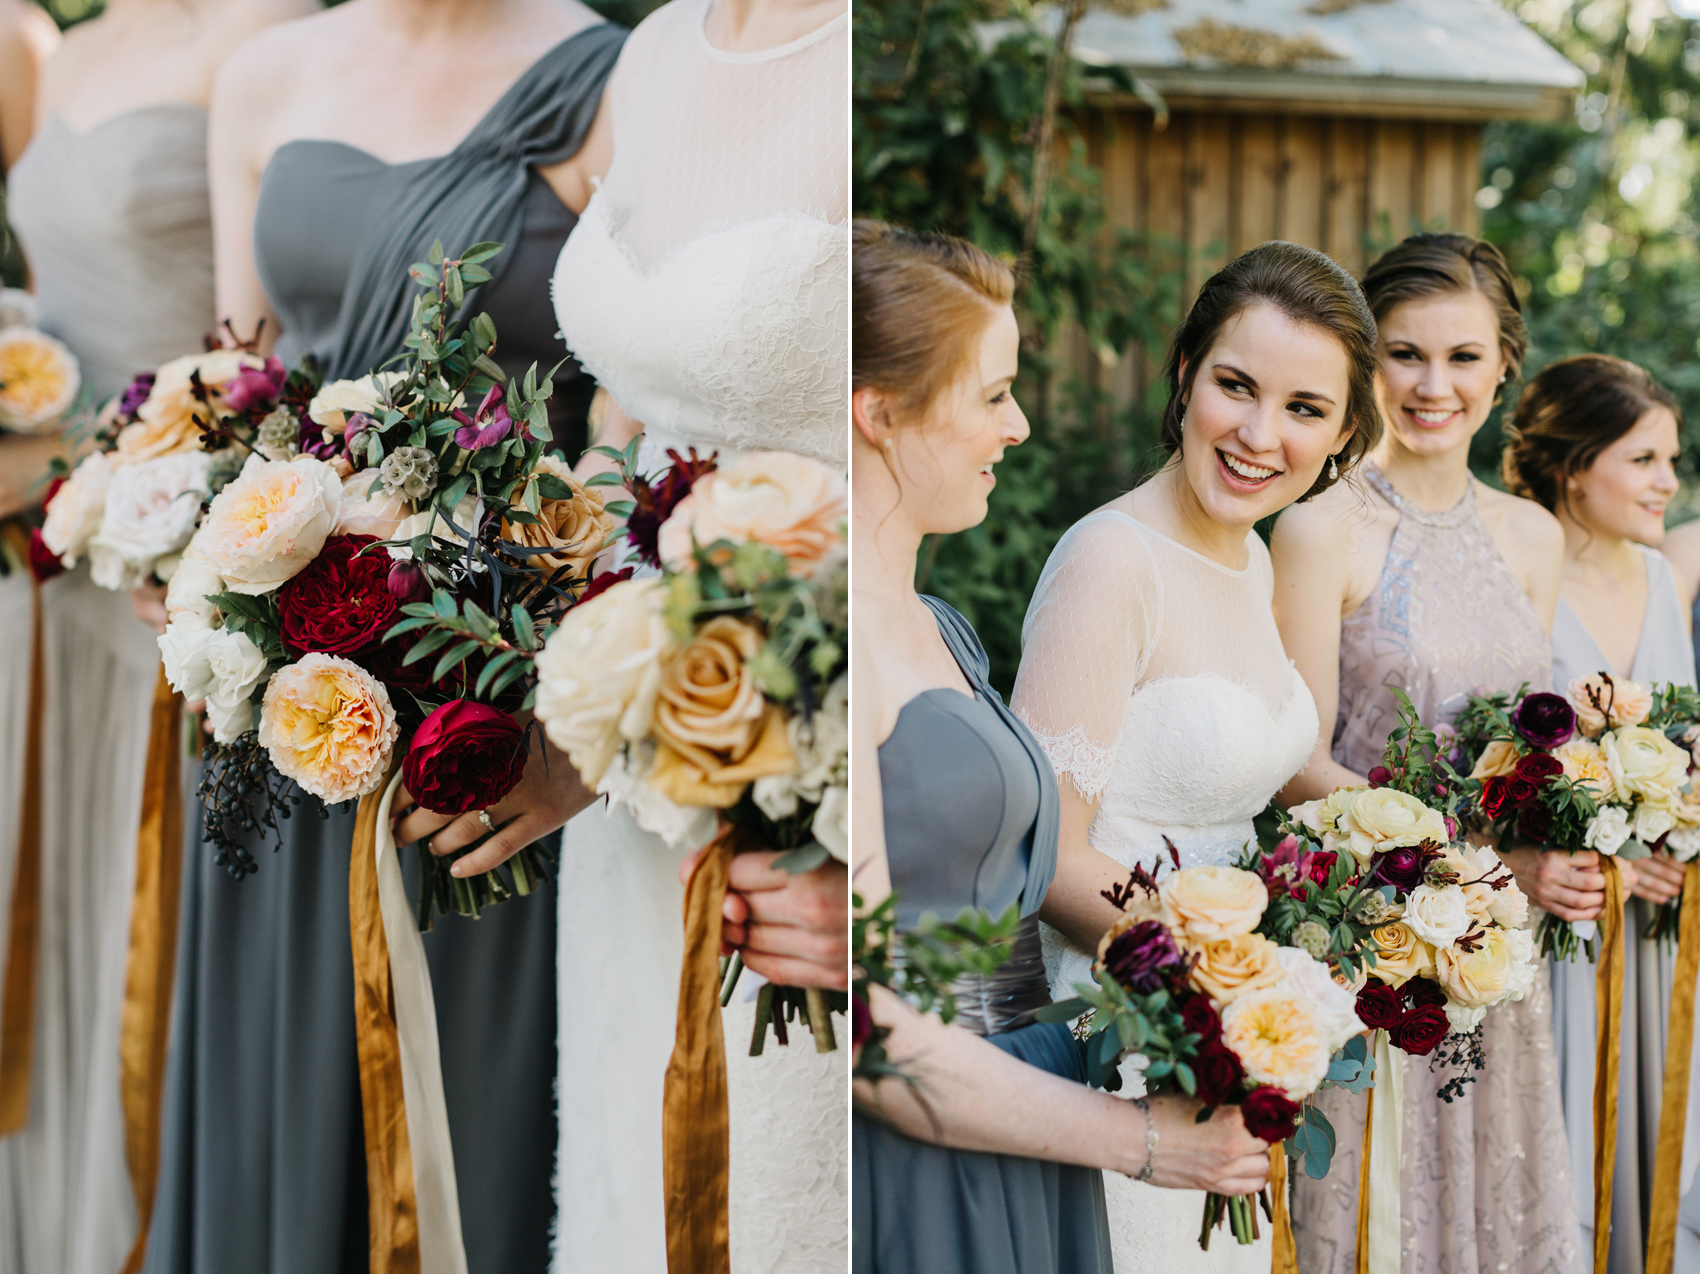 Burgundy, peach, and gold wedding bouquets with bridesmaids wearing mismatched grey dresses